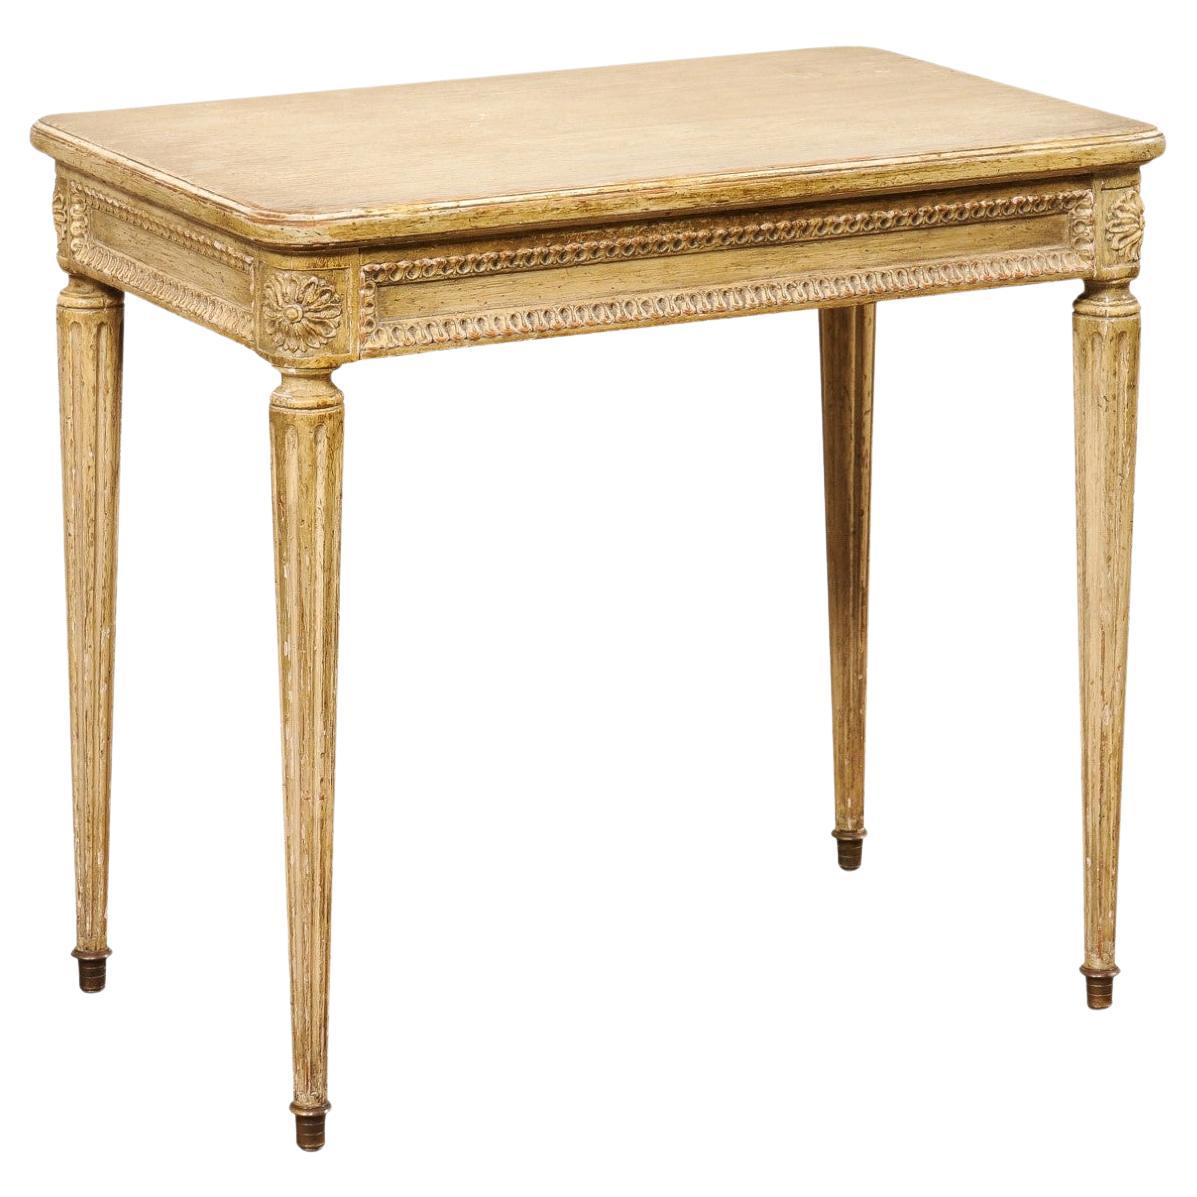 Louis XVI Style French Side Table with its Original Painted Finish Early 20th C.